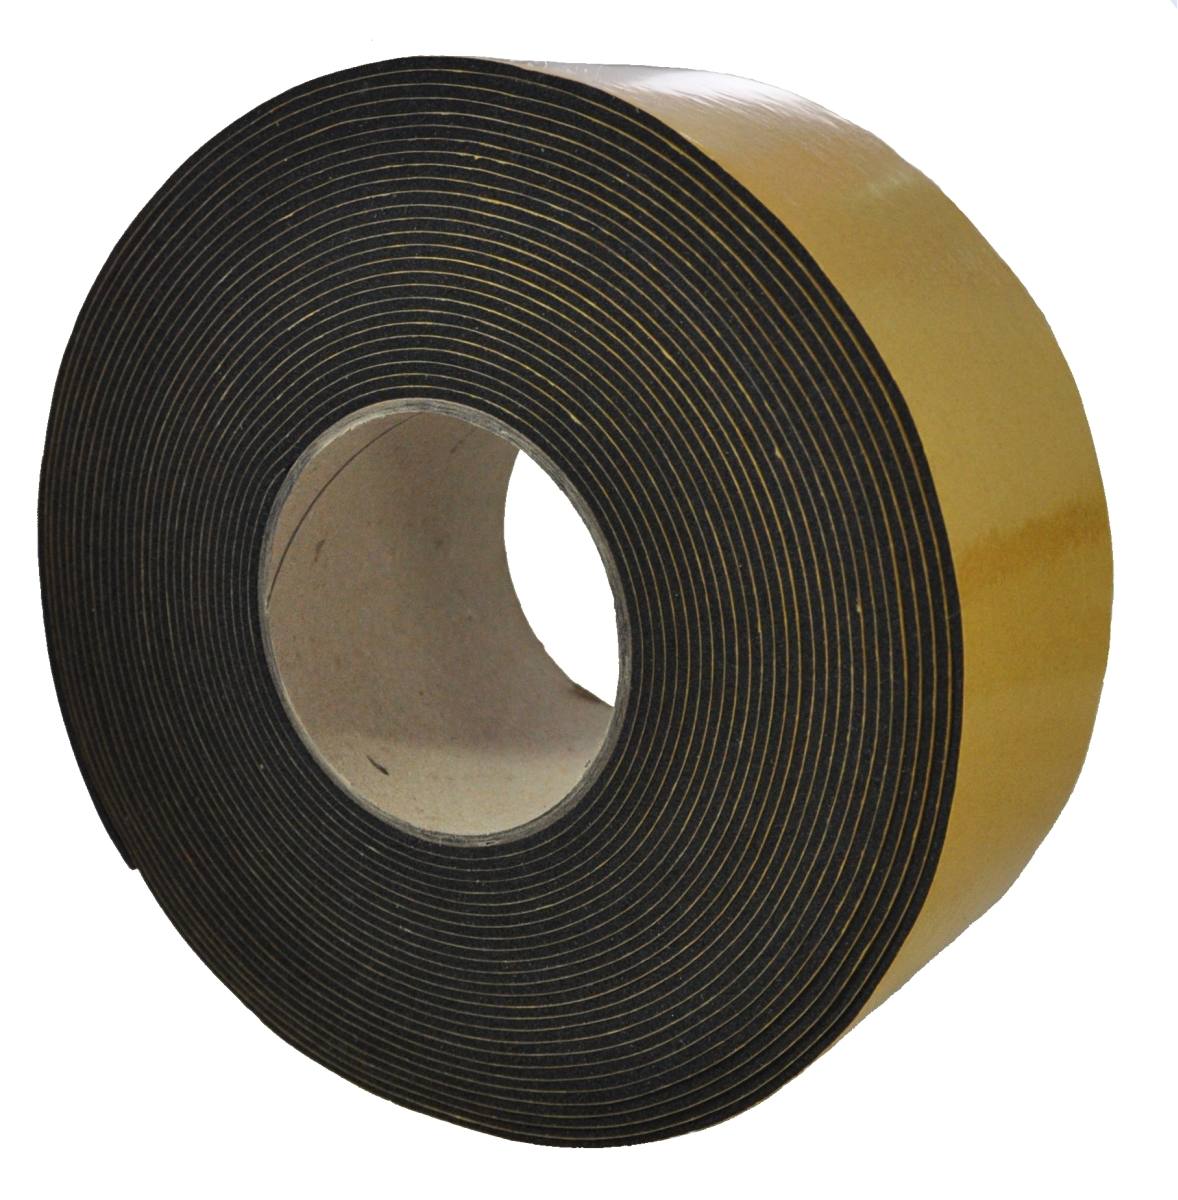 S-K-S EPDM 3mmx19mmx10m black self-adhesive on one side